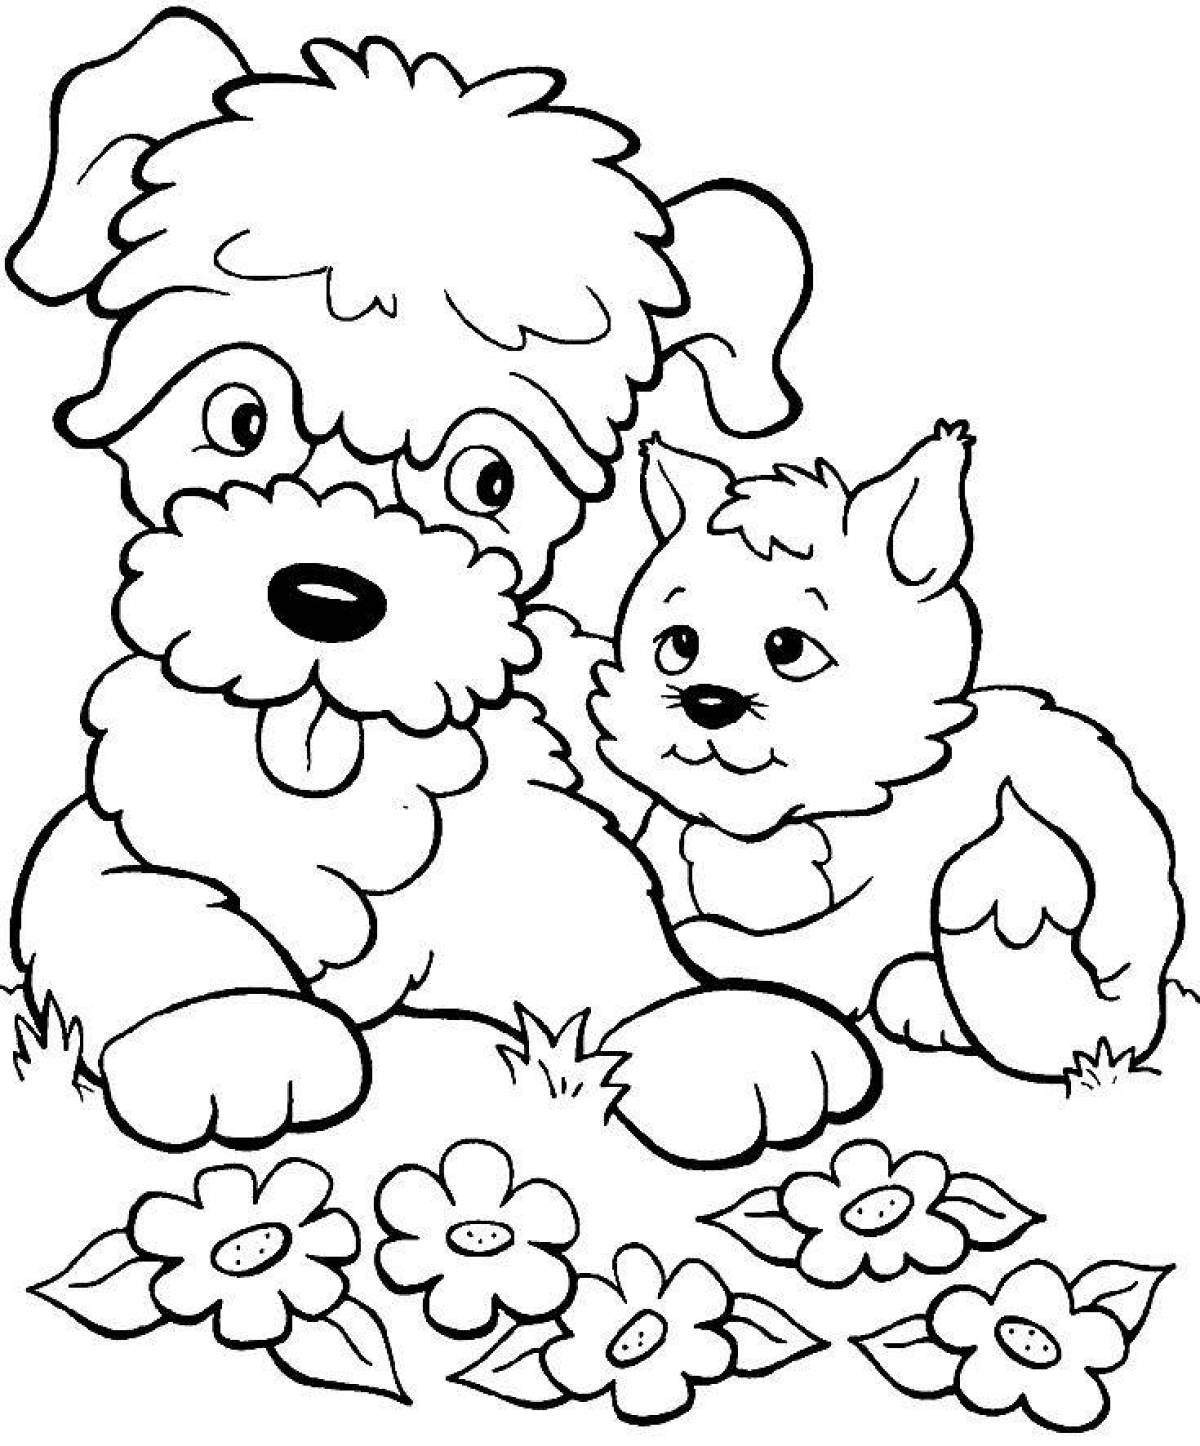 Coloring book shining dog and cat